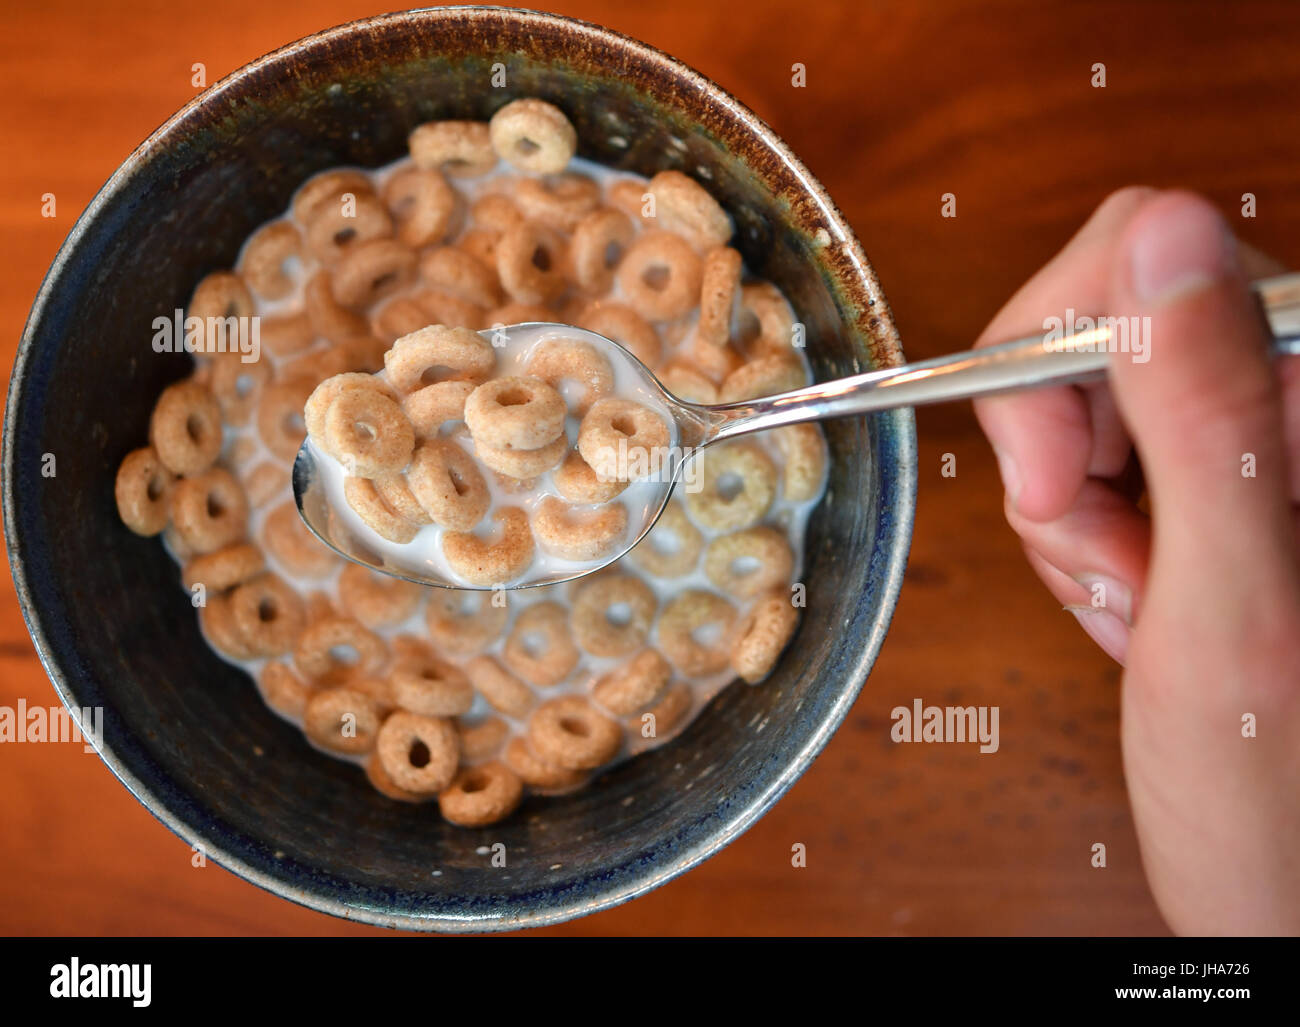 Sieversdorf, Germany. 12th July, 2017. ILLUSTRATION - Picture of a bowl  holding milk and breakfast cereal of the "Honey Rings" brand from Lidl  taken in Sieversdorf, Germany, 12 July 2017. Lidl is